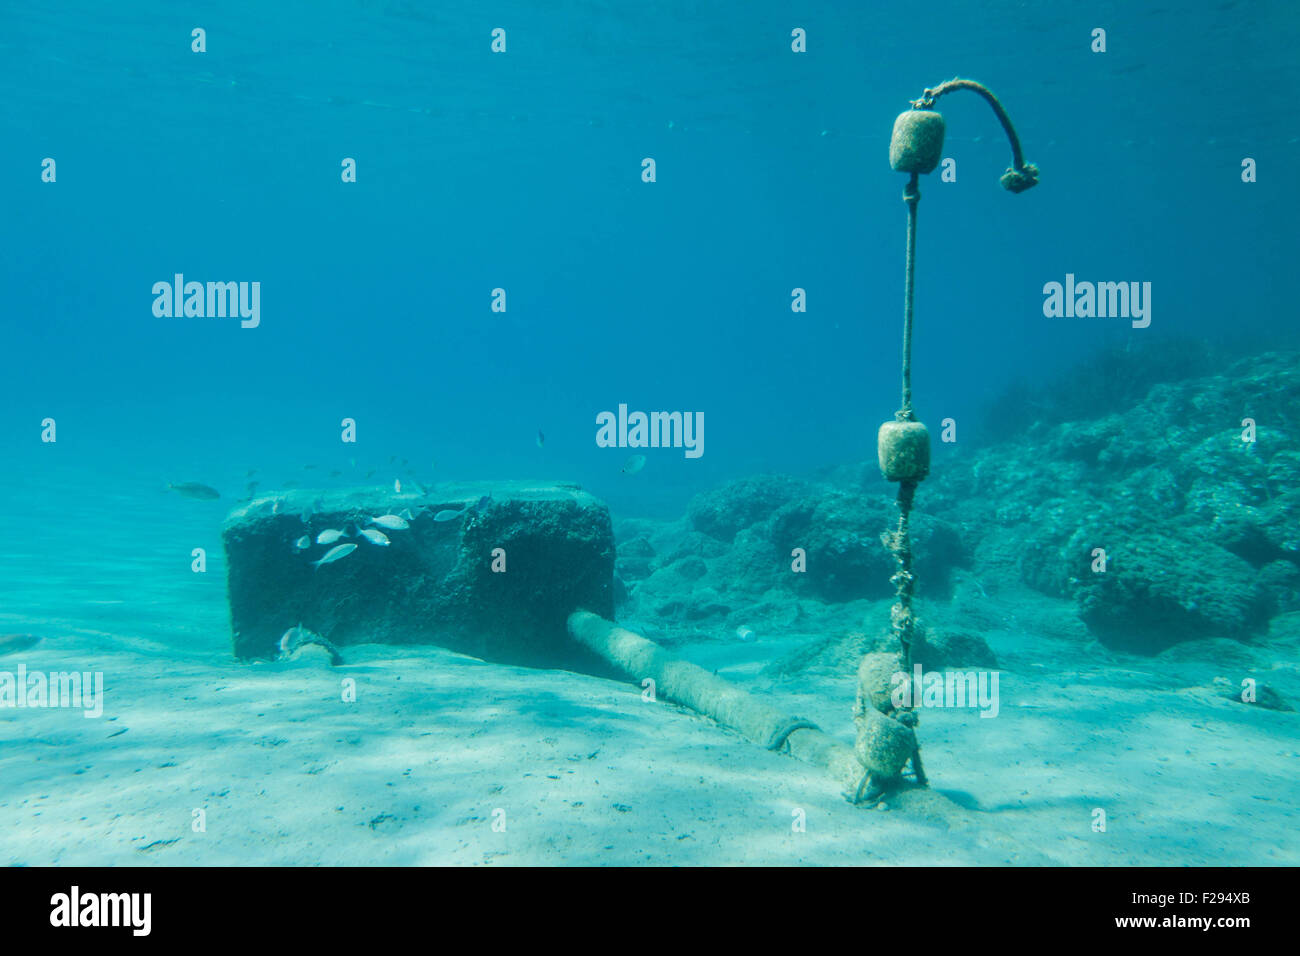 Rope floating underwater Banque D'Images